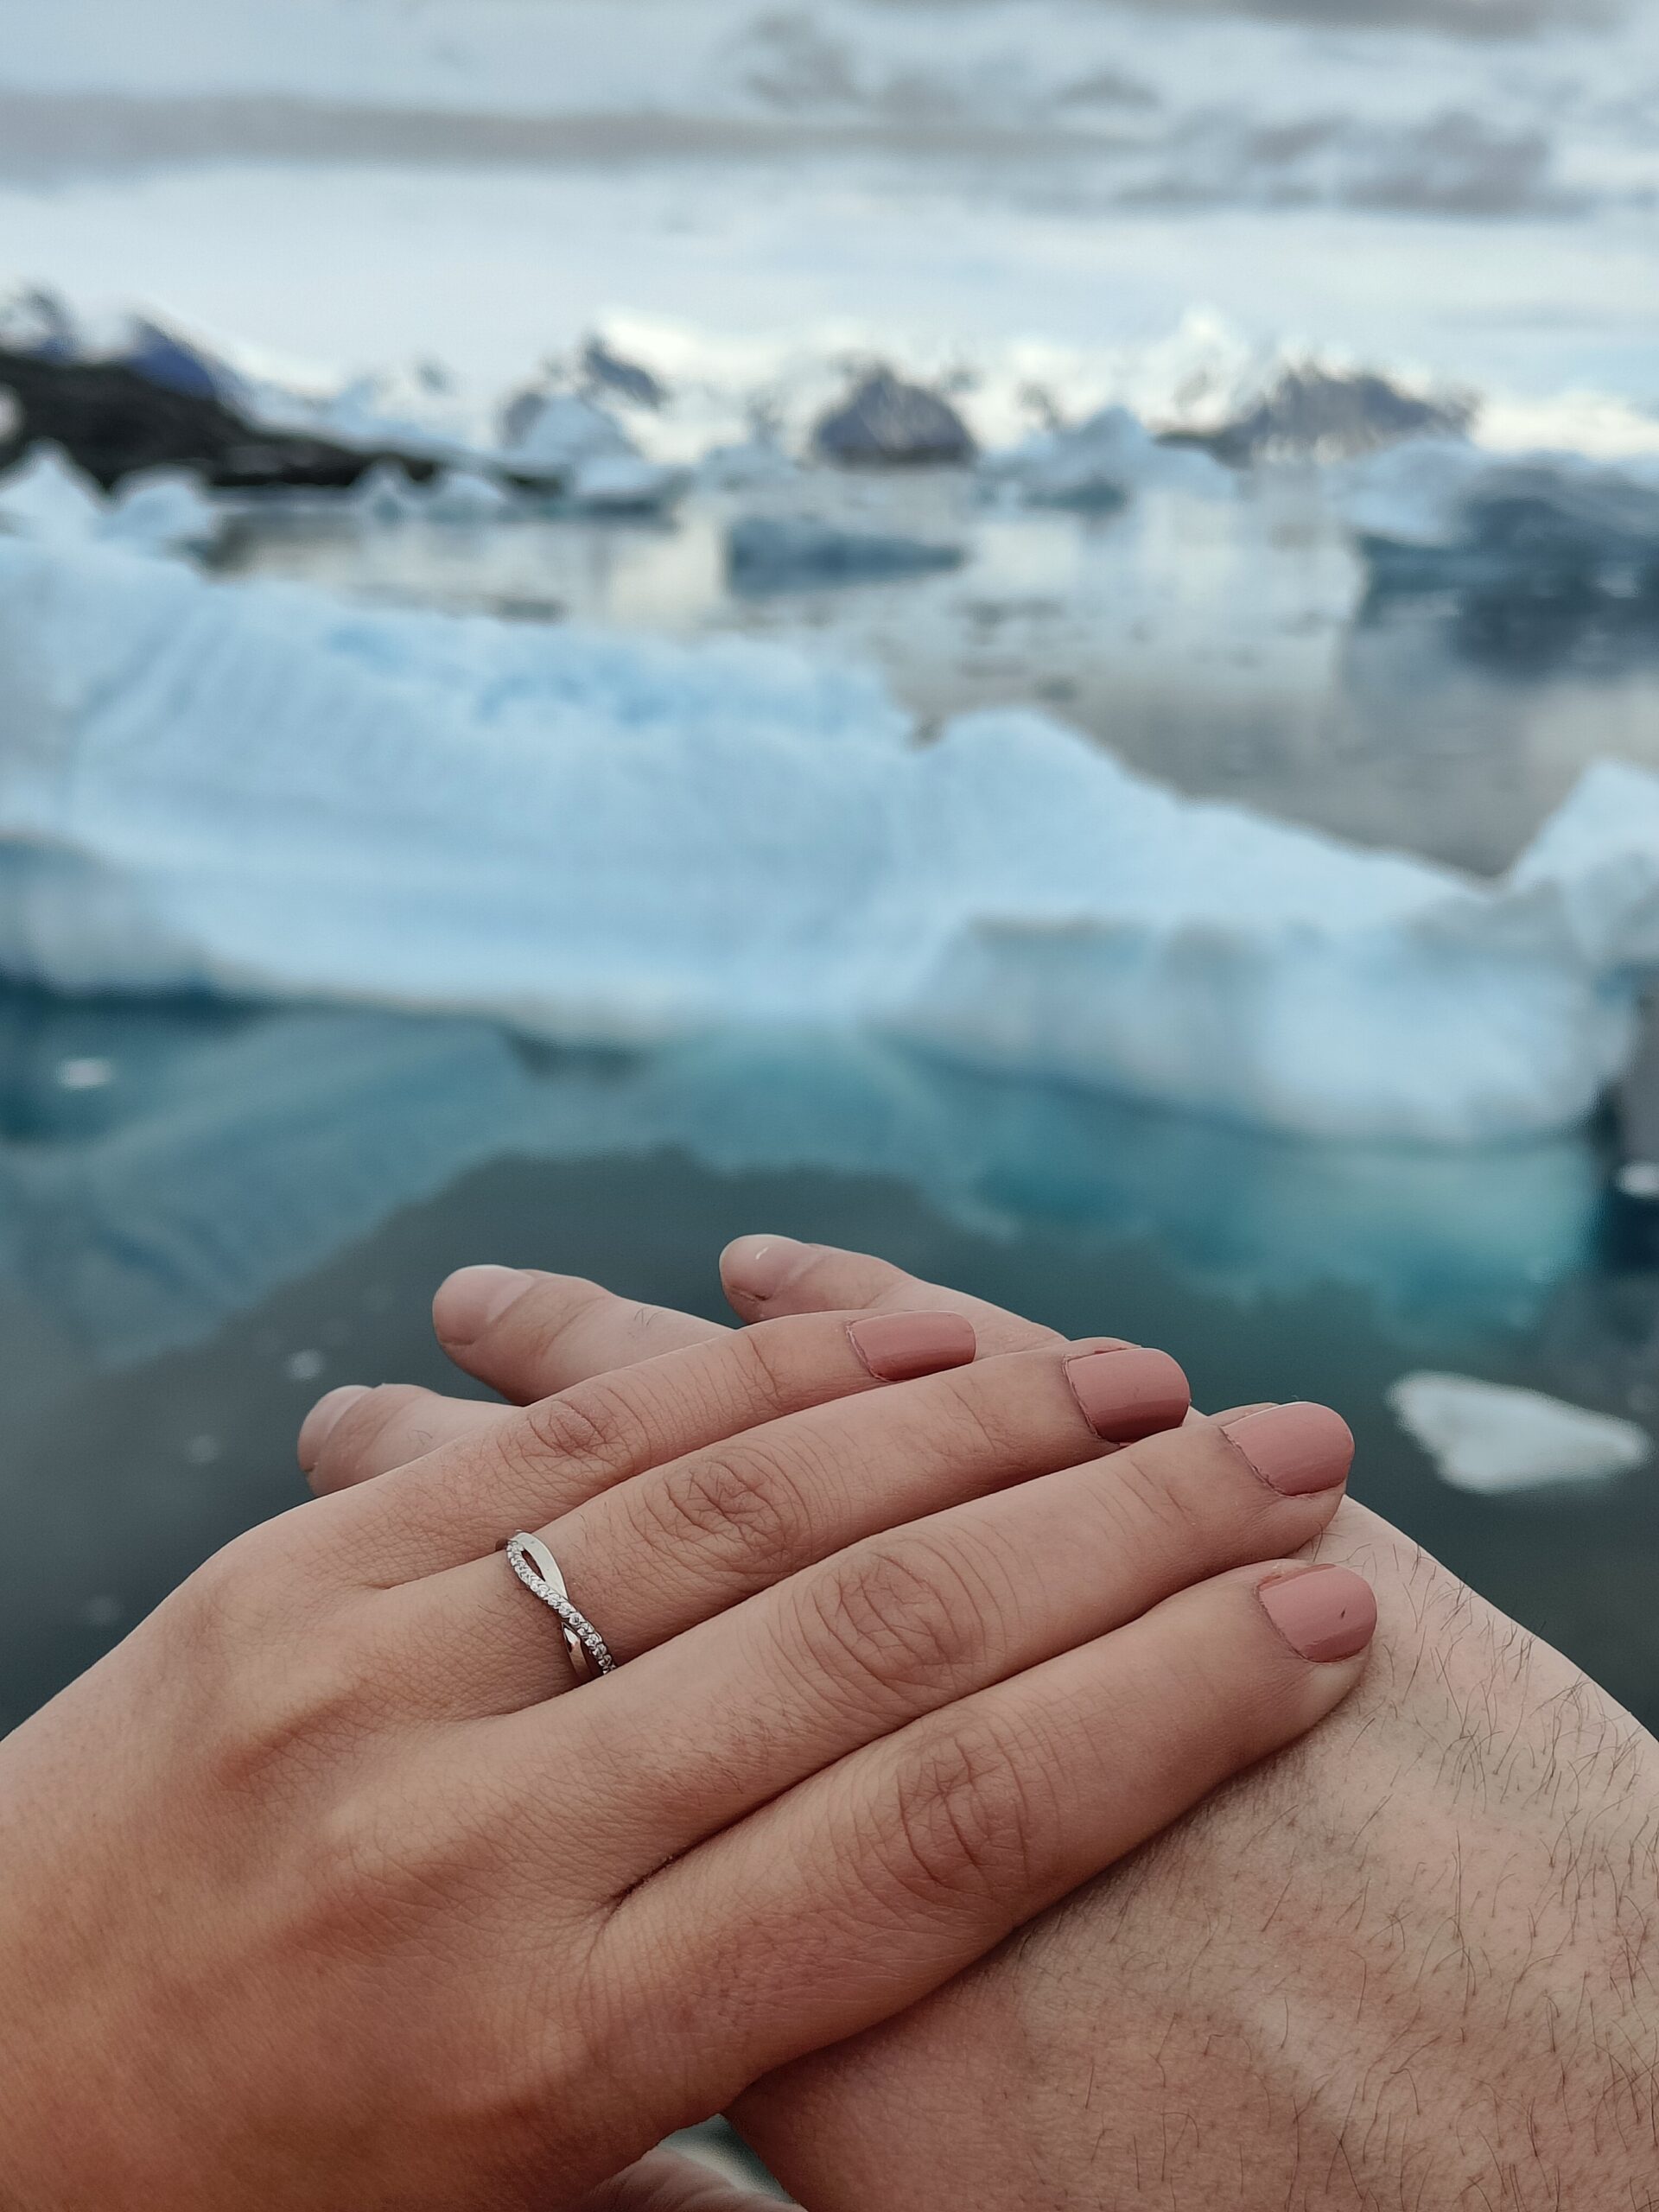 A hand with an engagement ring on a finger crossing over the top of another hand with icy mountains in the background